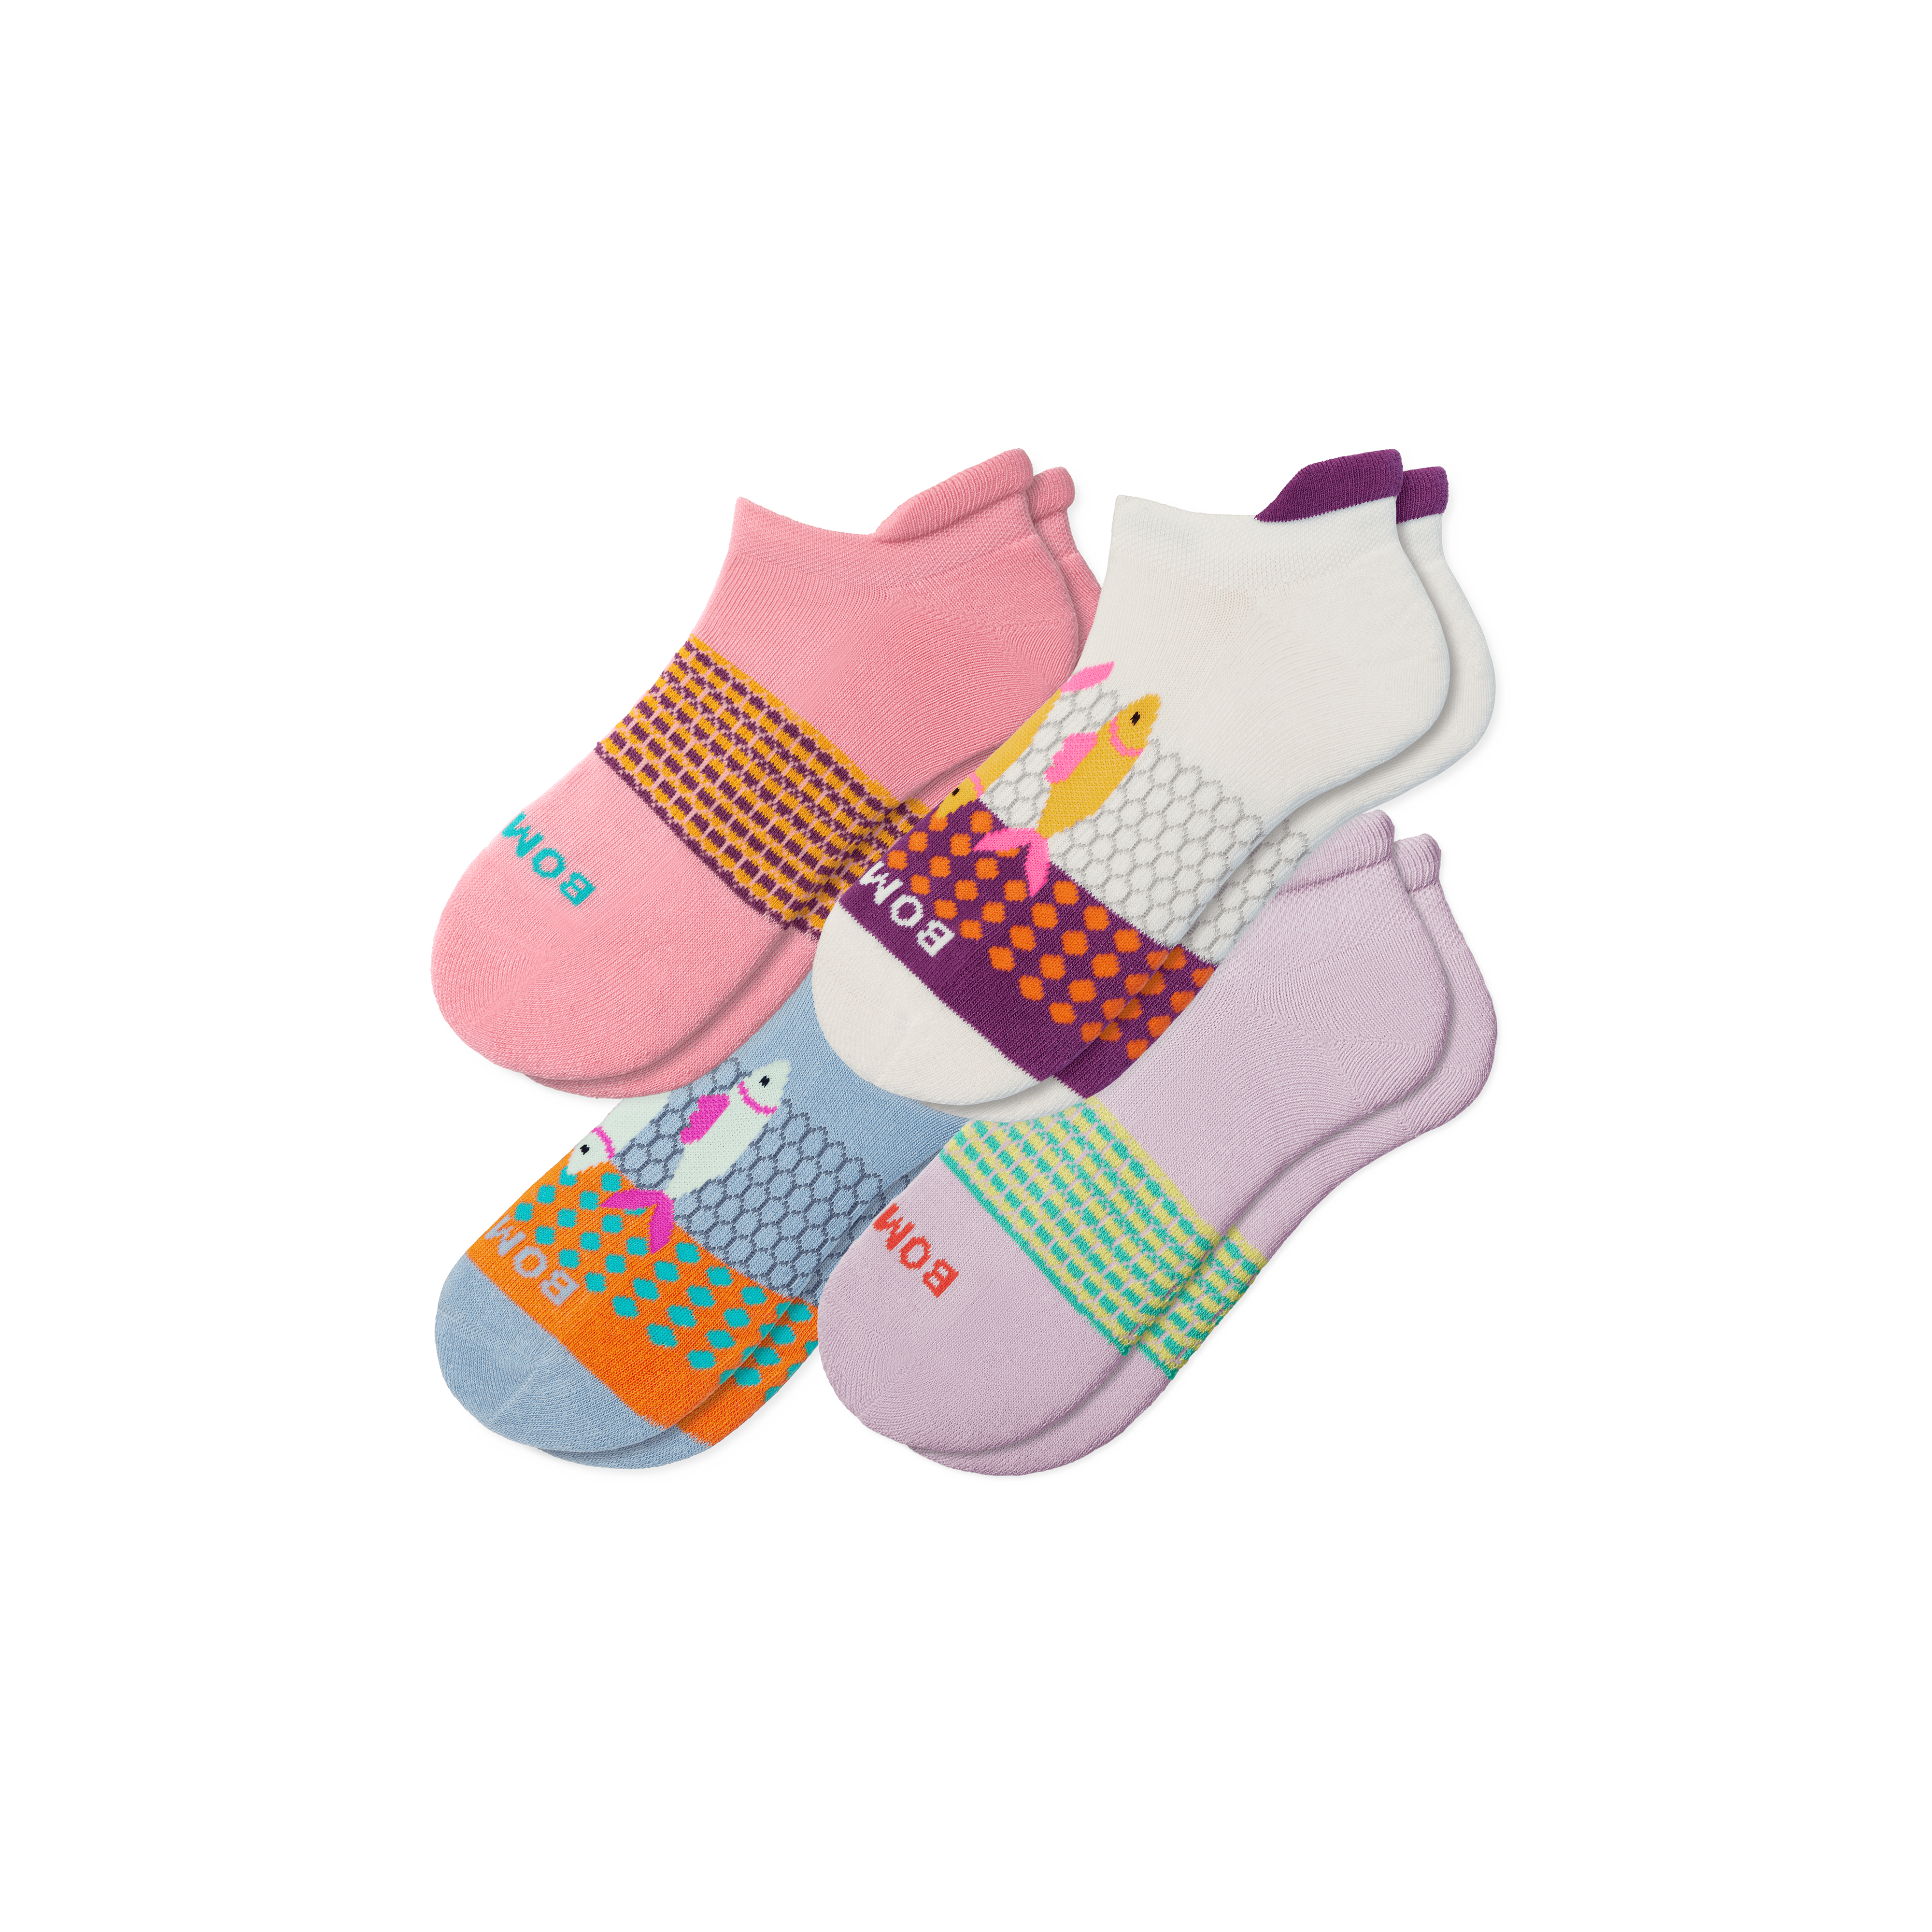 Bombas Aquatic Ankle Sock 4-pack In Ocean Pink Mix